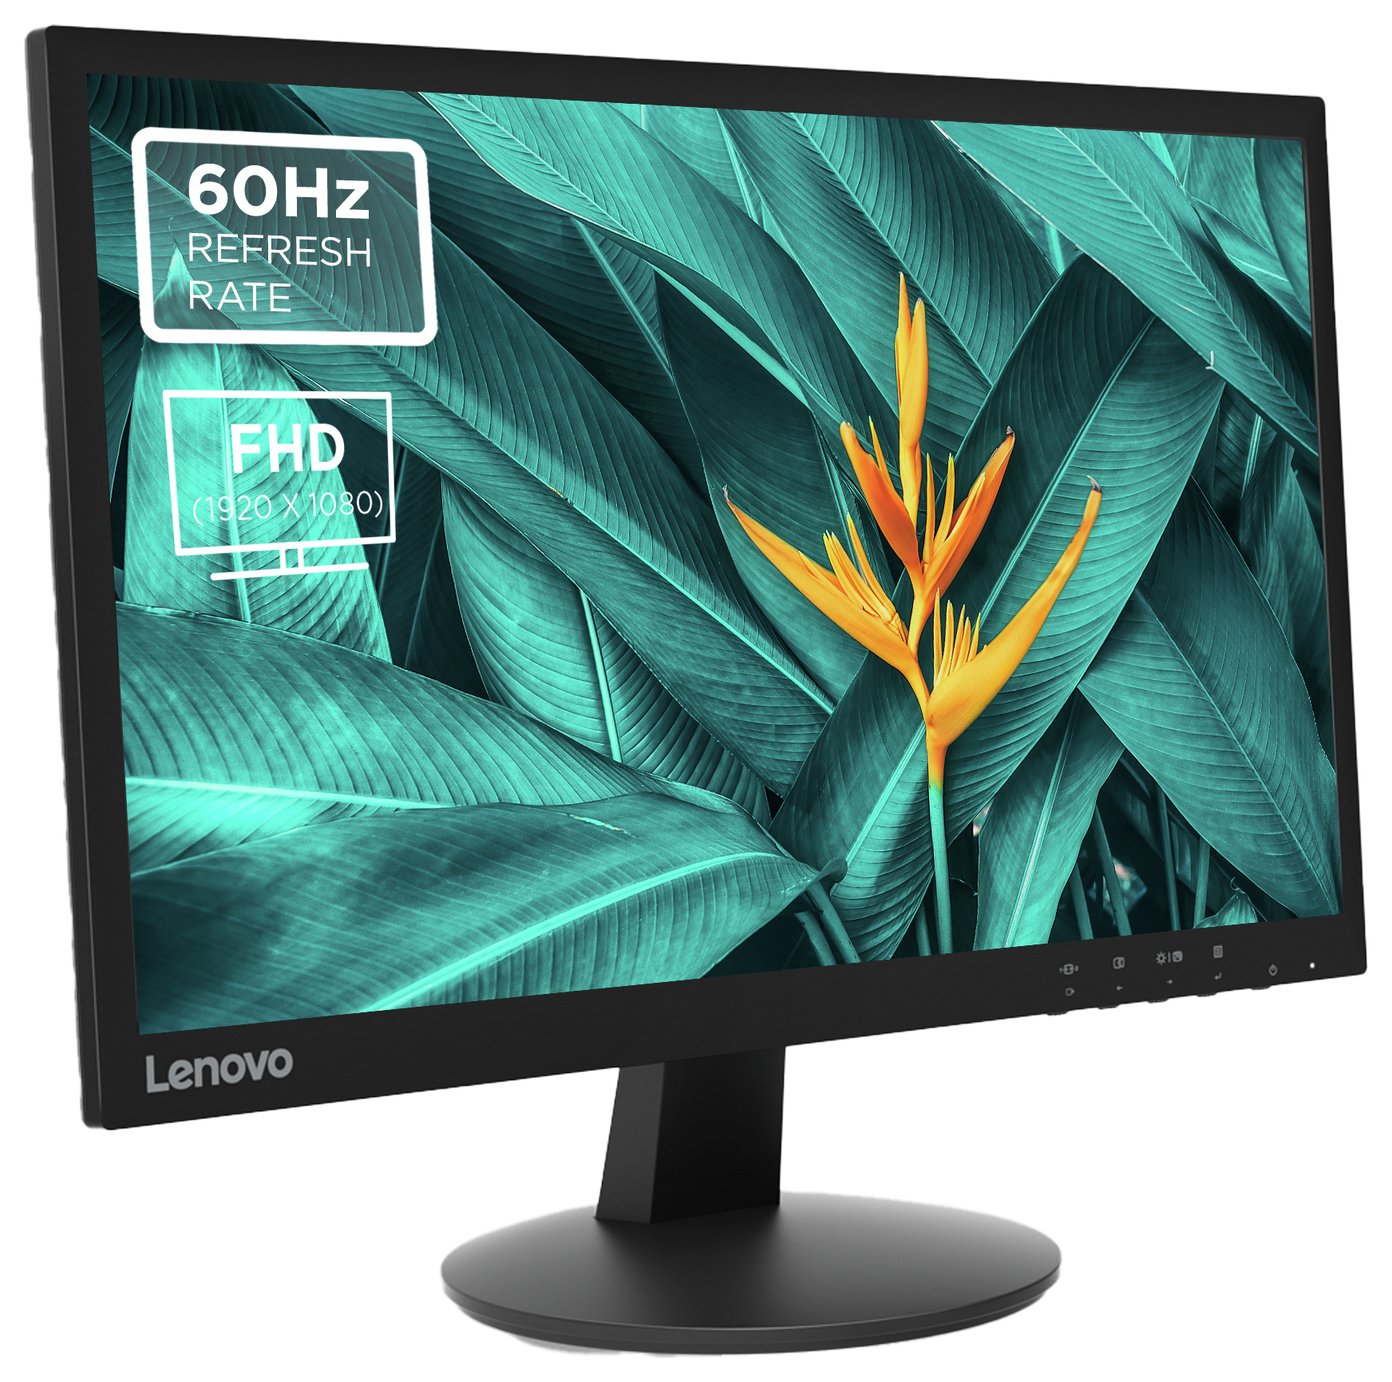 Lenovo C22-10 21.5in FHD Monitor Review